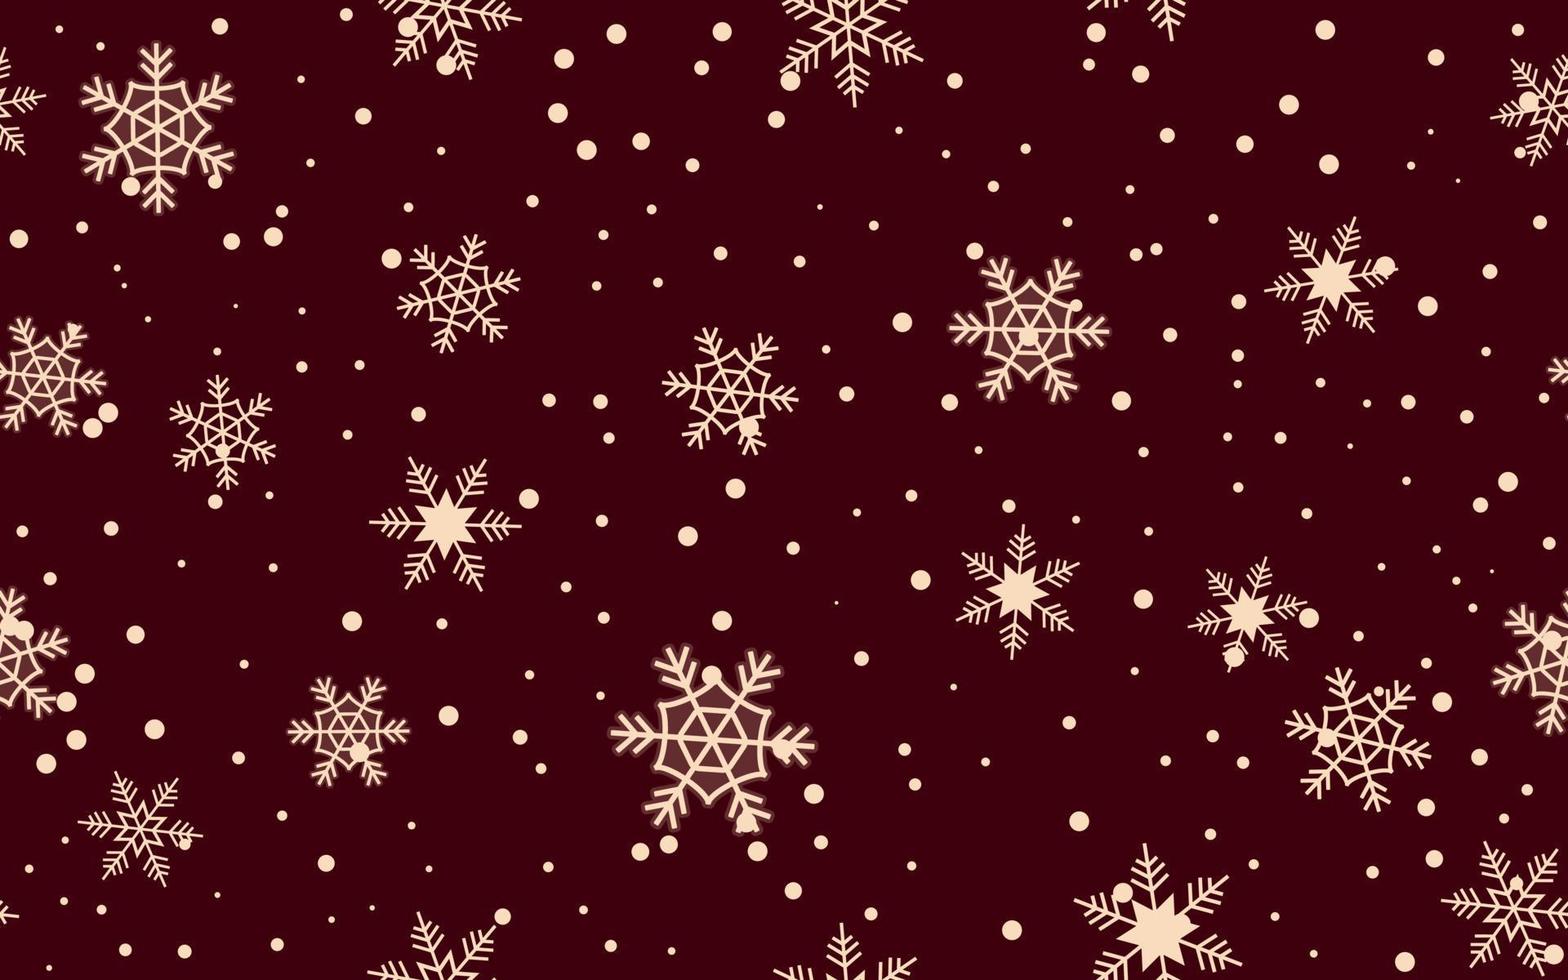 Simple Christmas background created with snowflake and snowfall like objects, Christmas banner vector illustration, Christmas sales banner.